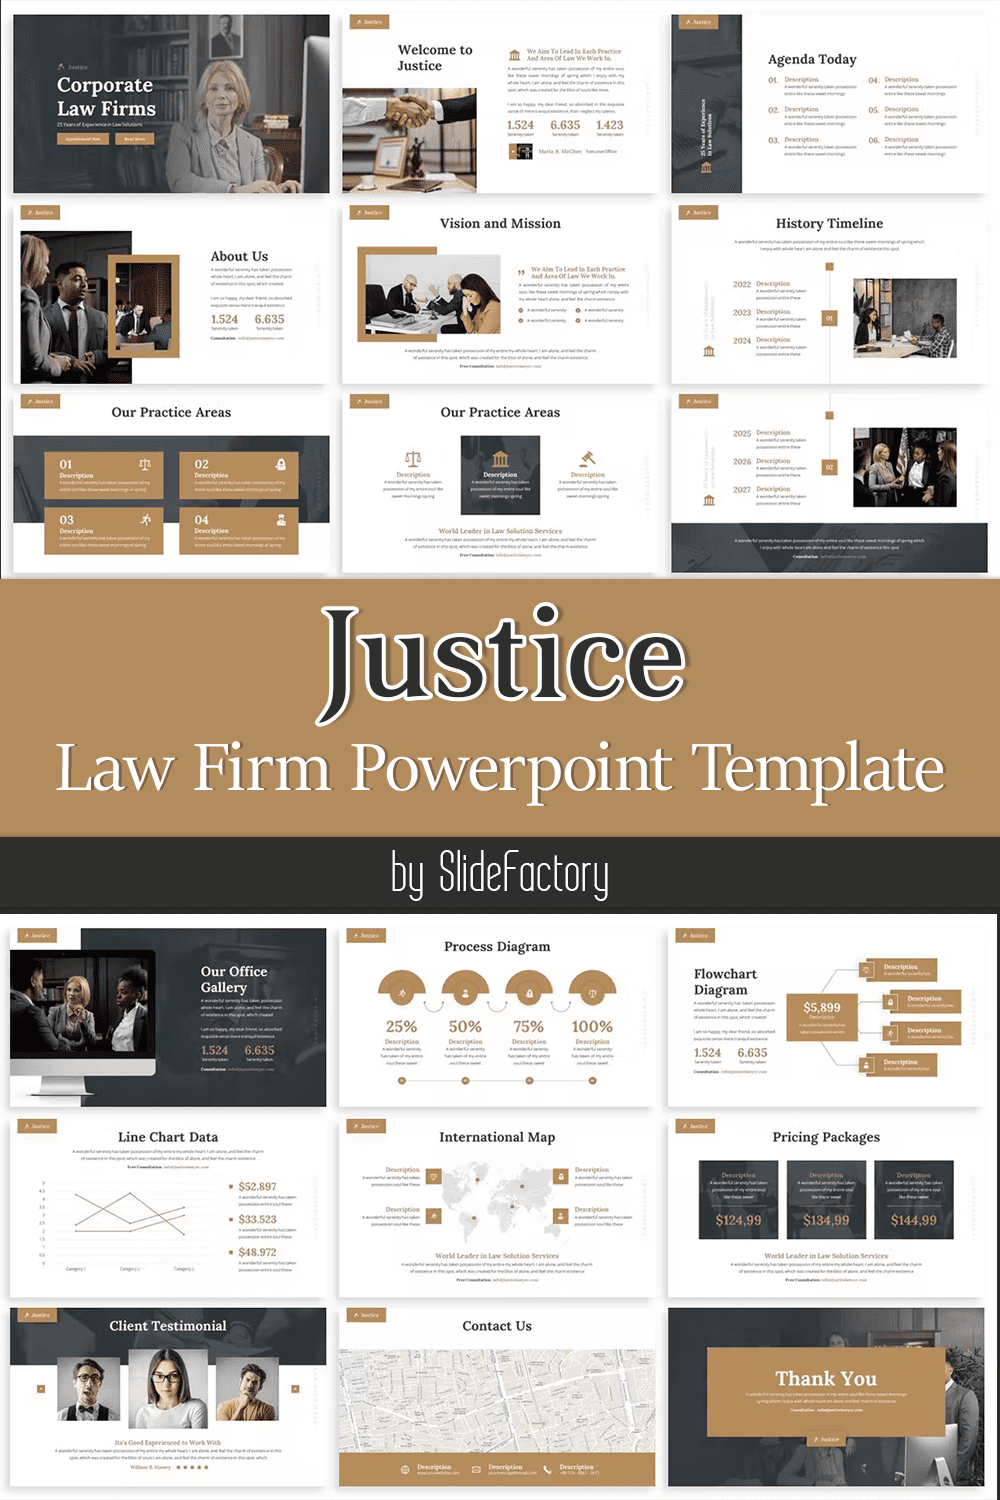 Justice law firm powerpoint template of pinterest.